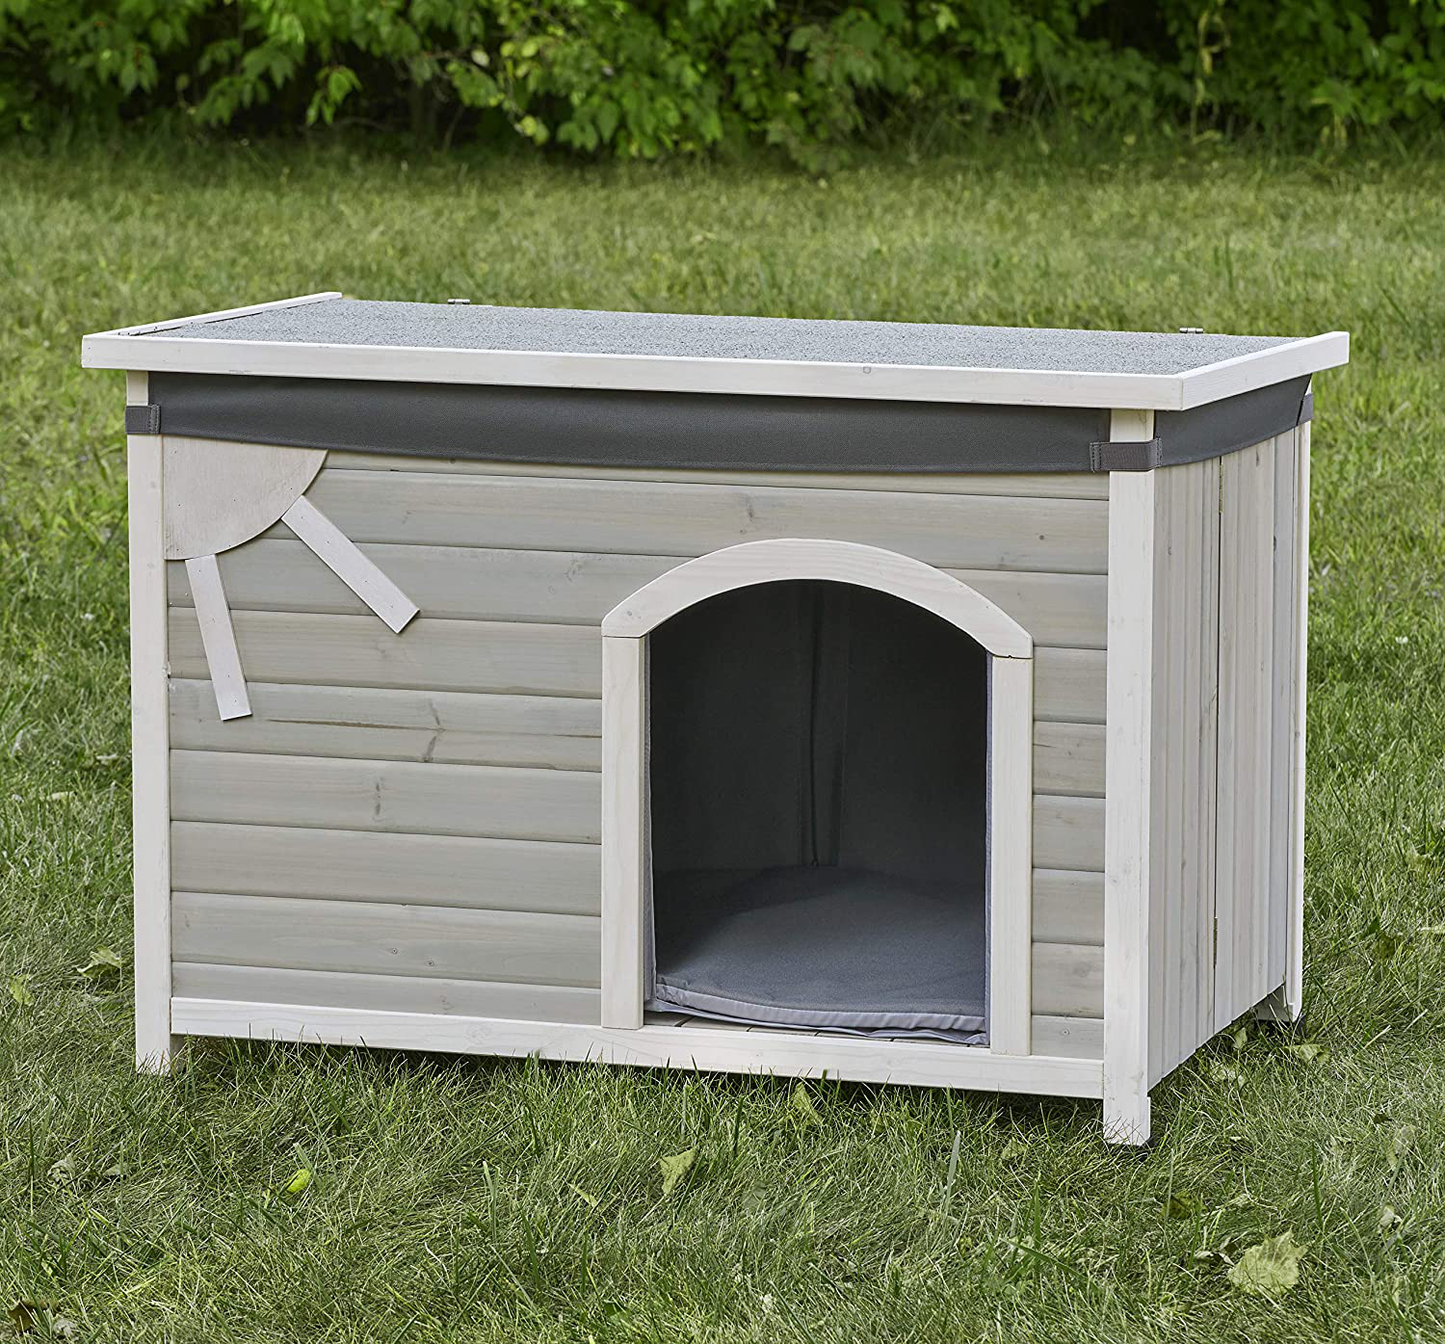 Midwest Homes for Pets Eilio Dog House Insulation Kit, Fits Small Dog House Measuring 21.74L X 33.59W X 25.28H - Inches, 1-Year Manufacturer'S Warranty Animals & Pet Supplies > Pet Supplies > Dog Supplies > Dog Houses MidWest Homes for Pets   